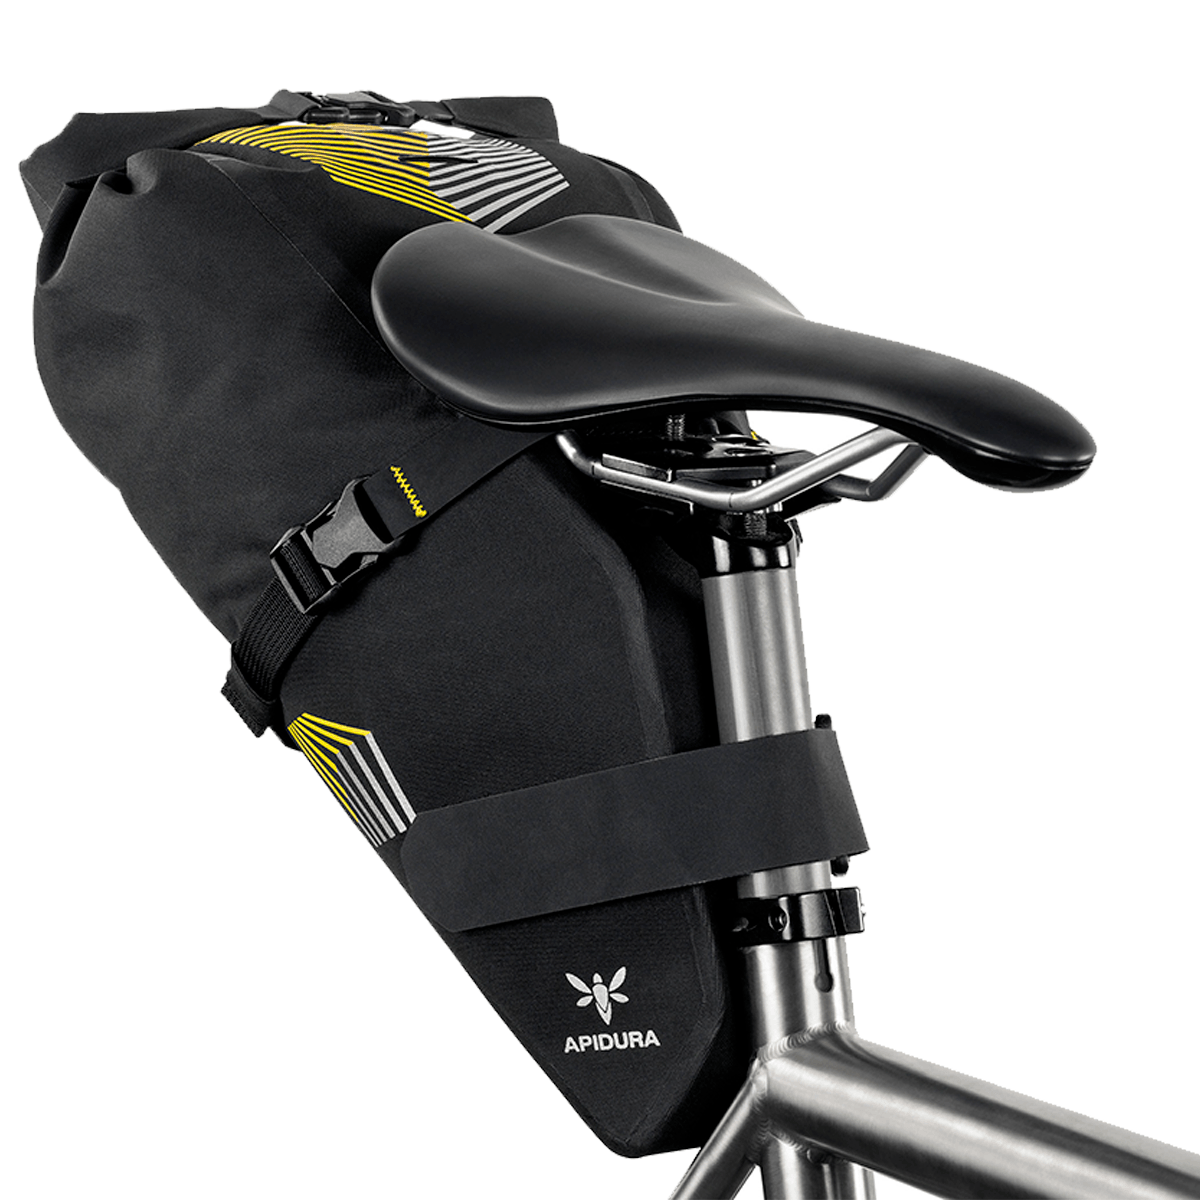 Racing Saddle Pack - veloboutiquecl